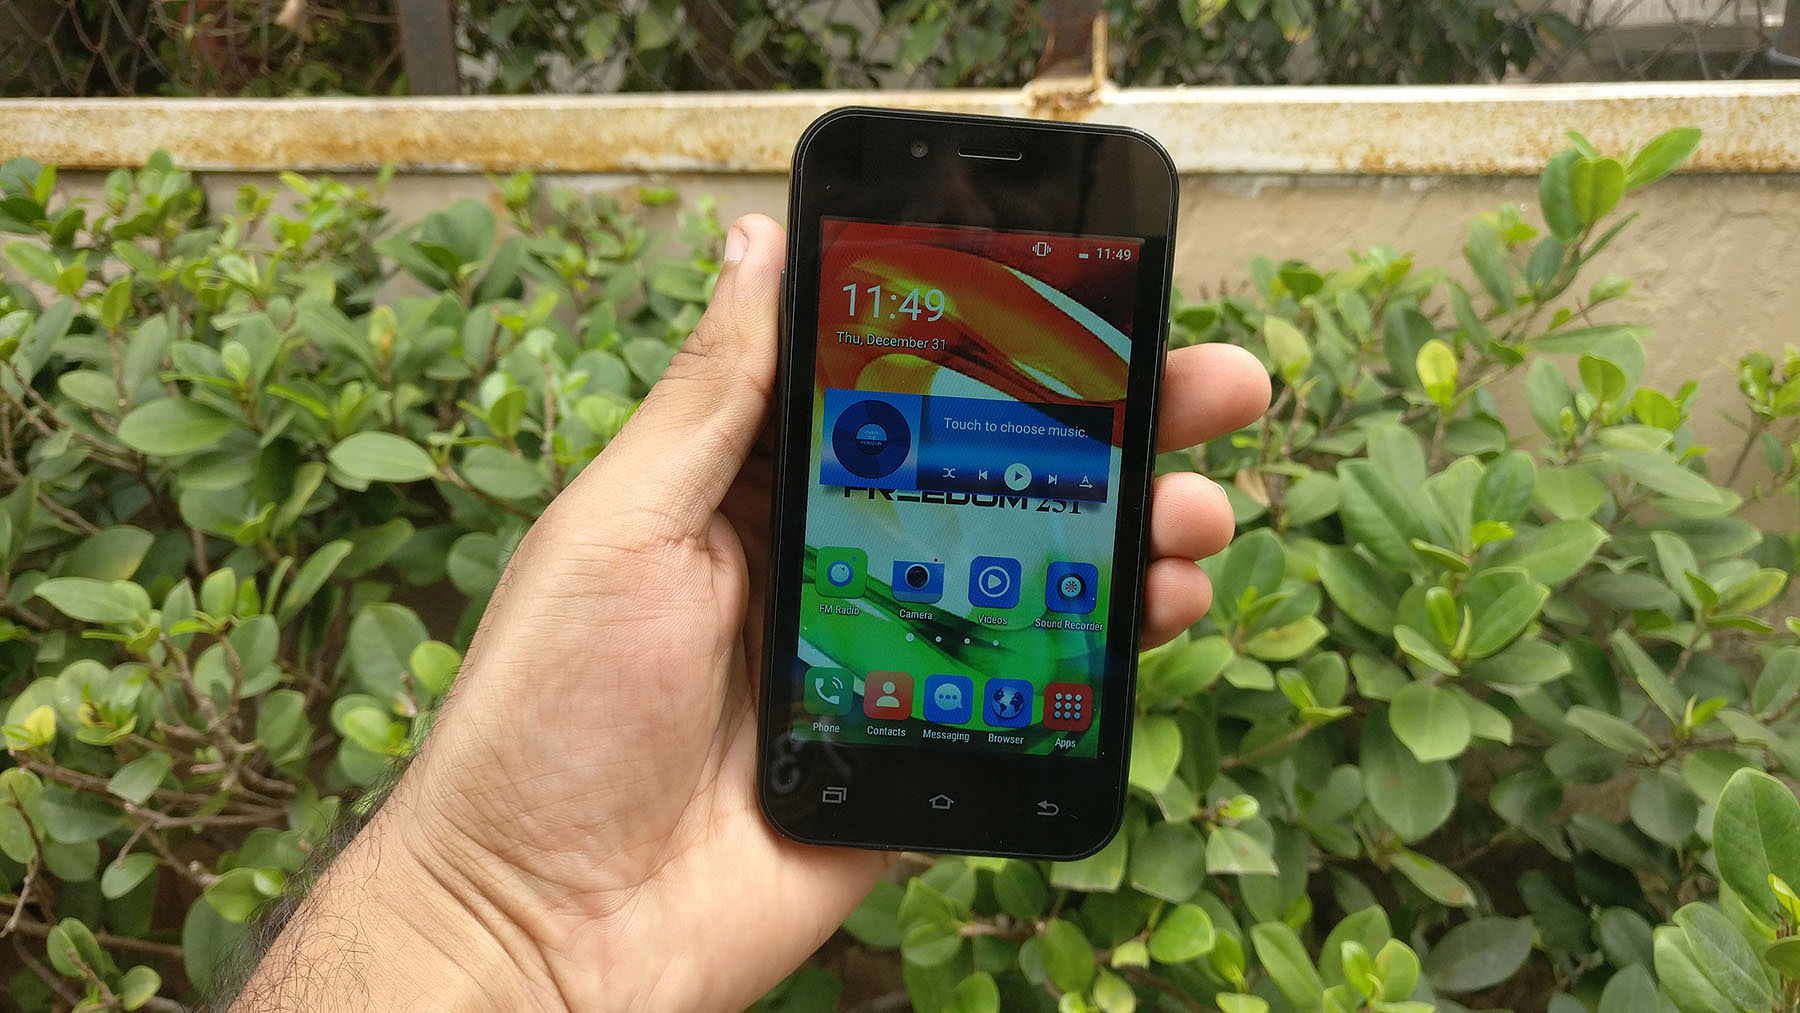 Freedom 251 phone from Ringing Bells. (Photo: <b>The Quint</b>)